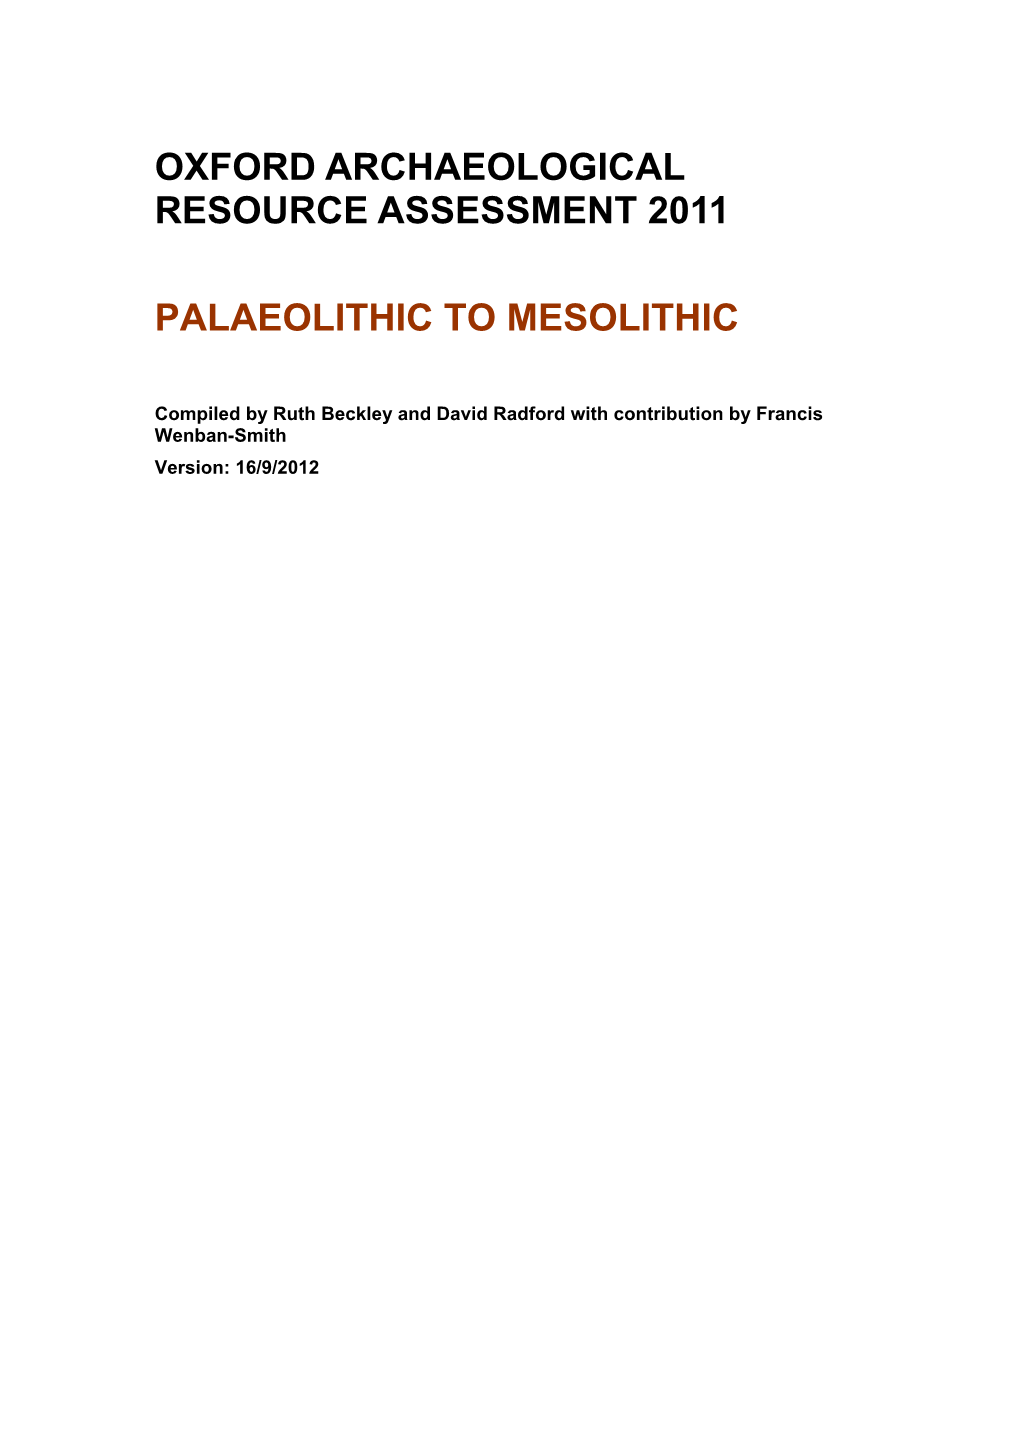 Palaeolithic to Mesolithic